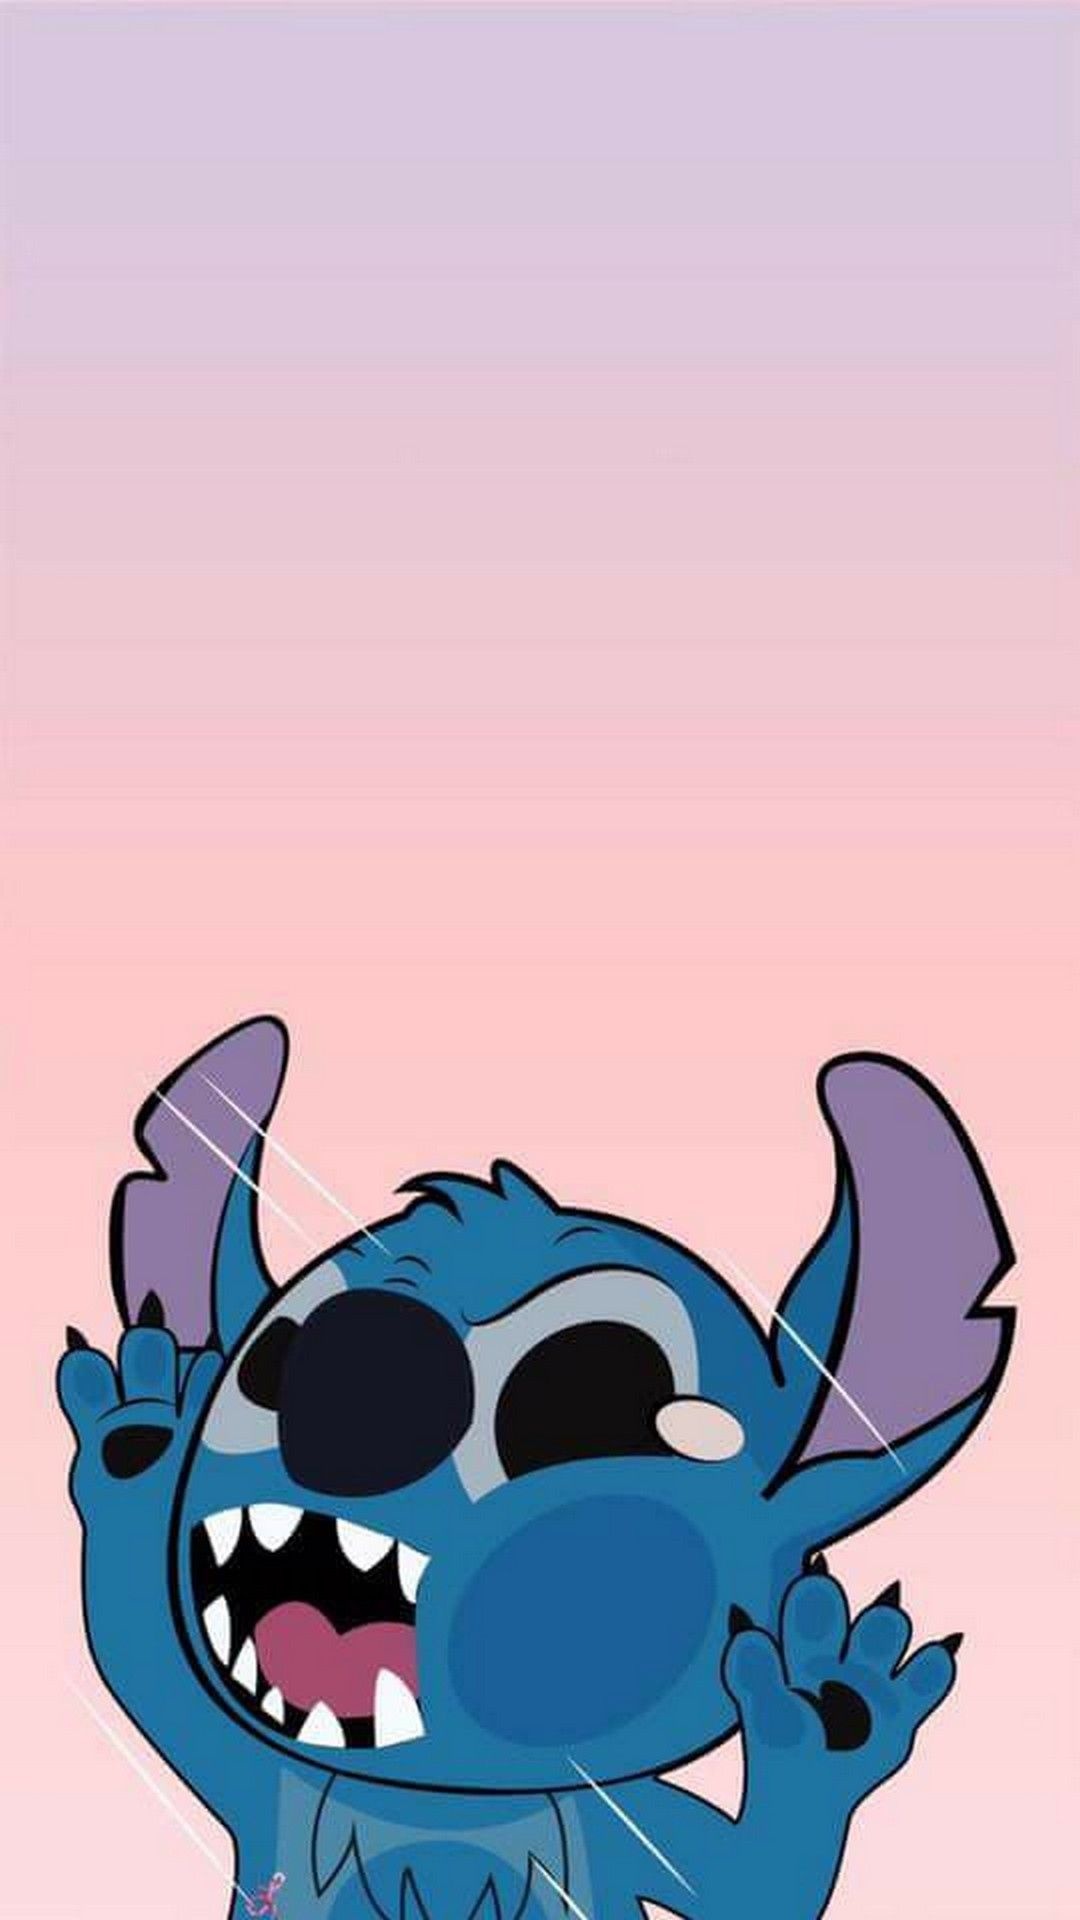 Stitch animation, Angry Stitch wallpapers, Adorable blue creature, Cute alien companion, 1080x1920 Full HD Handy